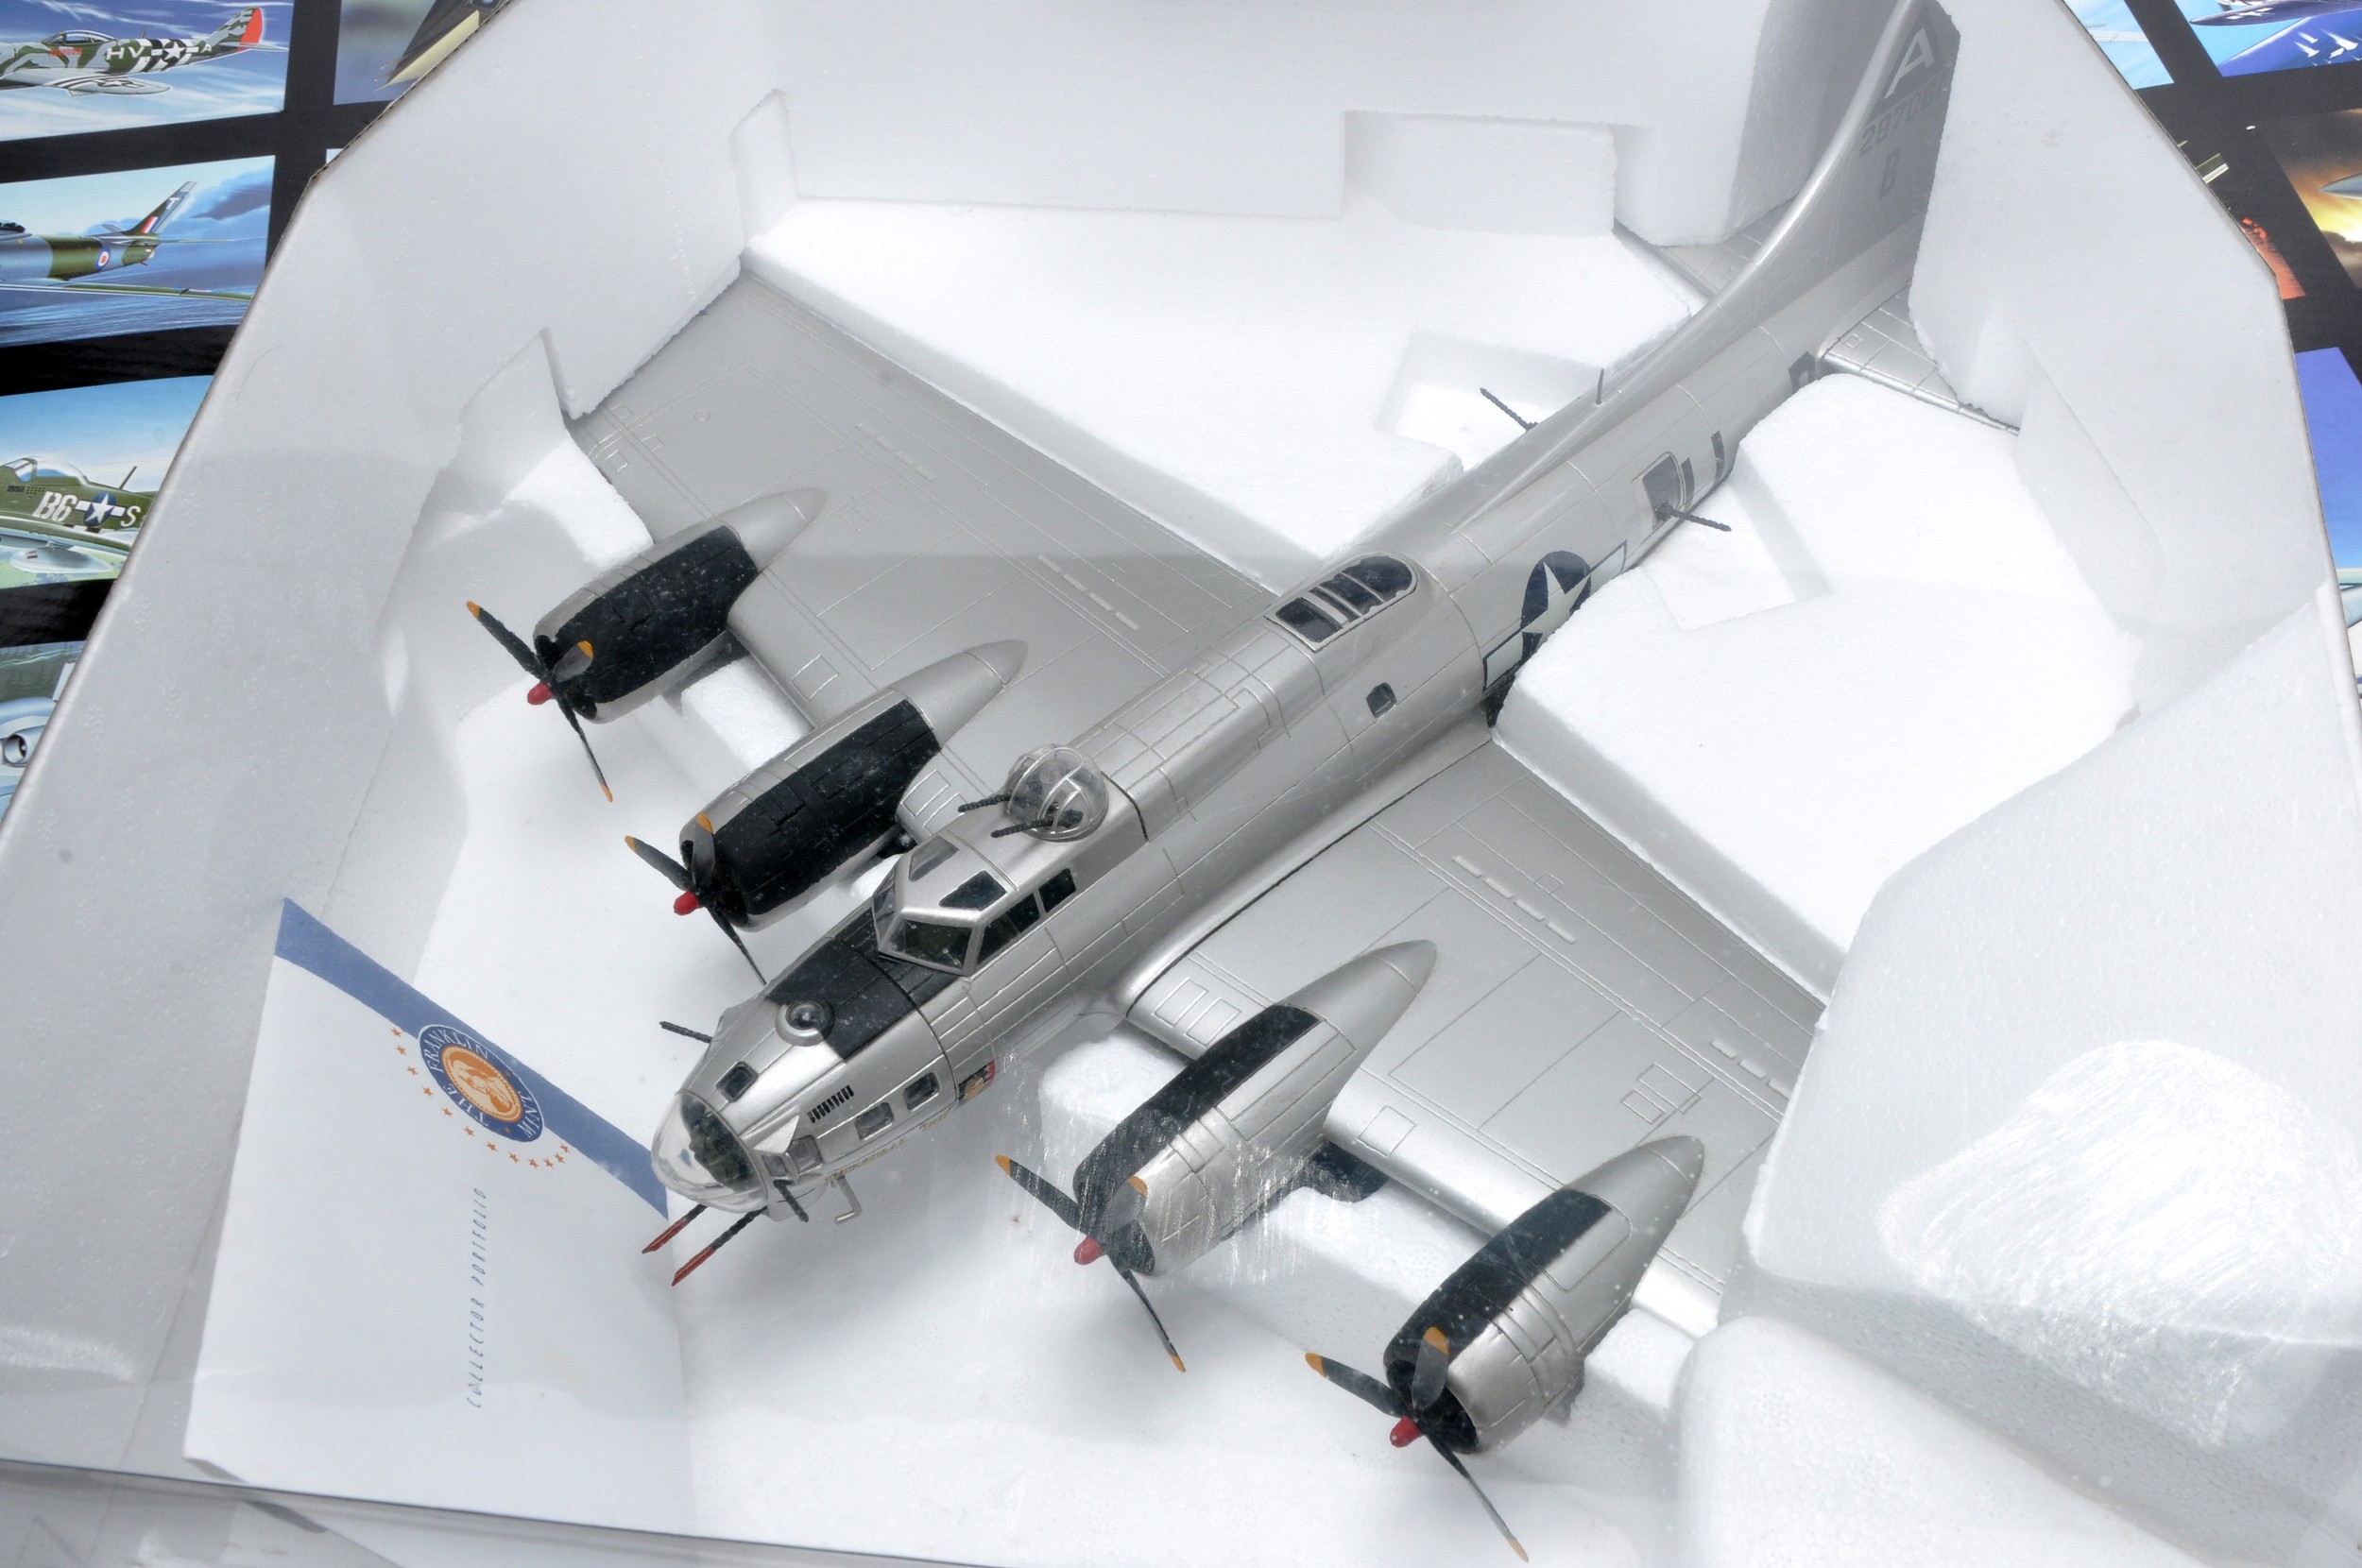 Franklin Mint 1/48 diecast model aircraft issue comprising No. B11E055 B17 Flying Fortress. Looks to - Image 2 of 2